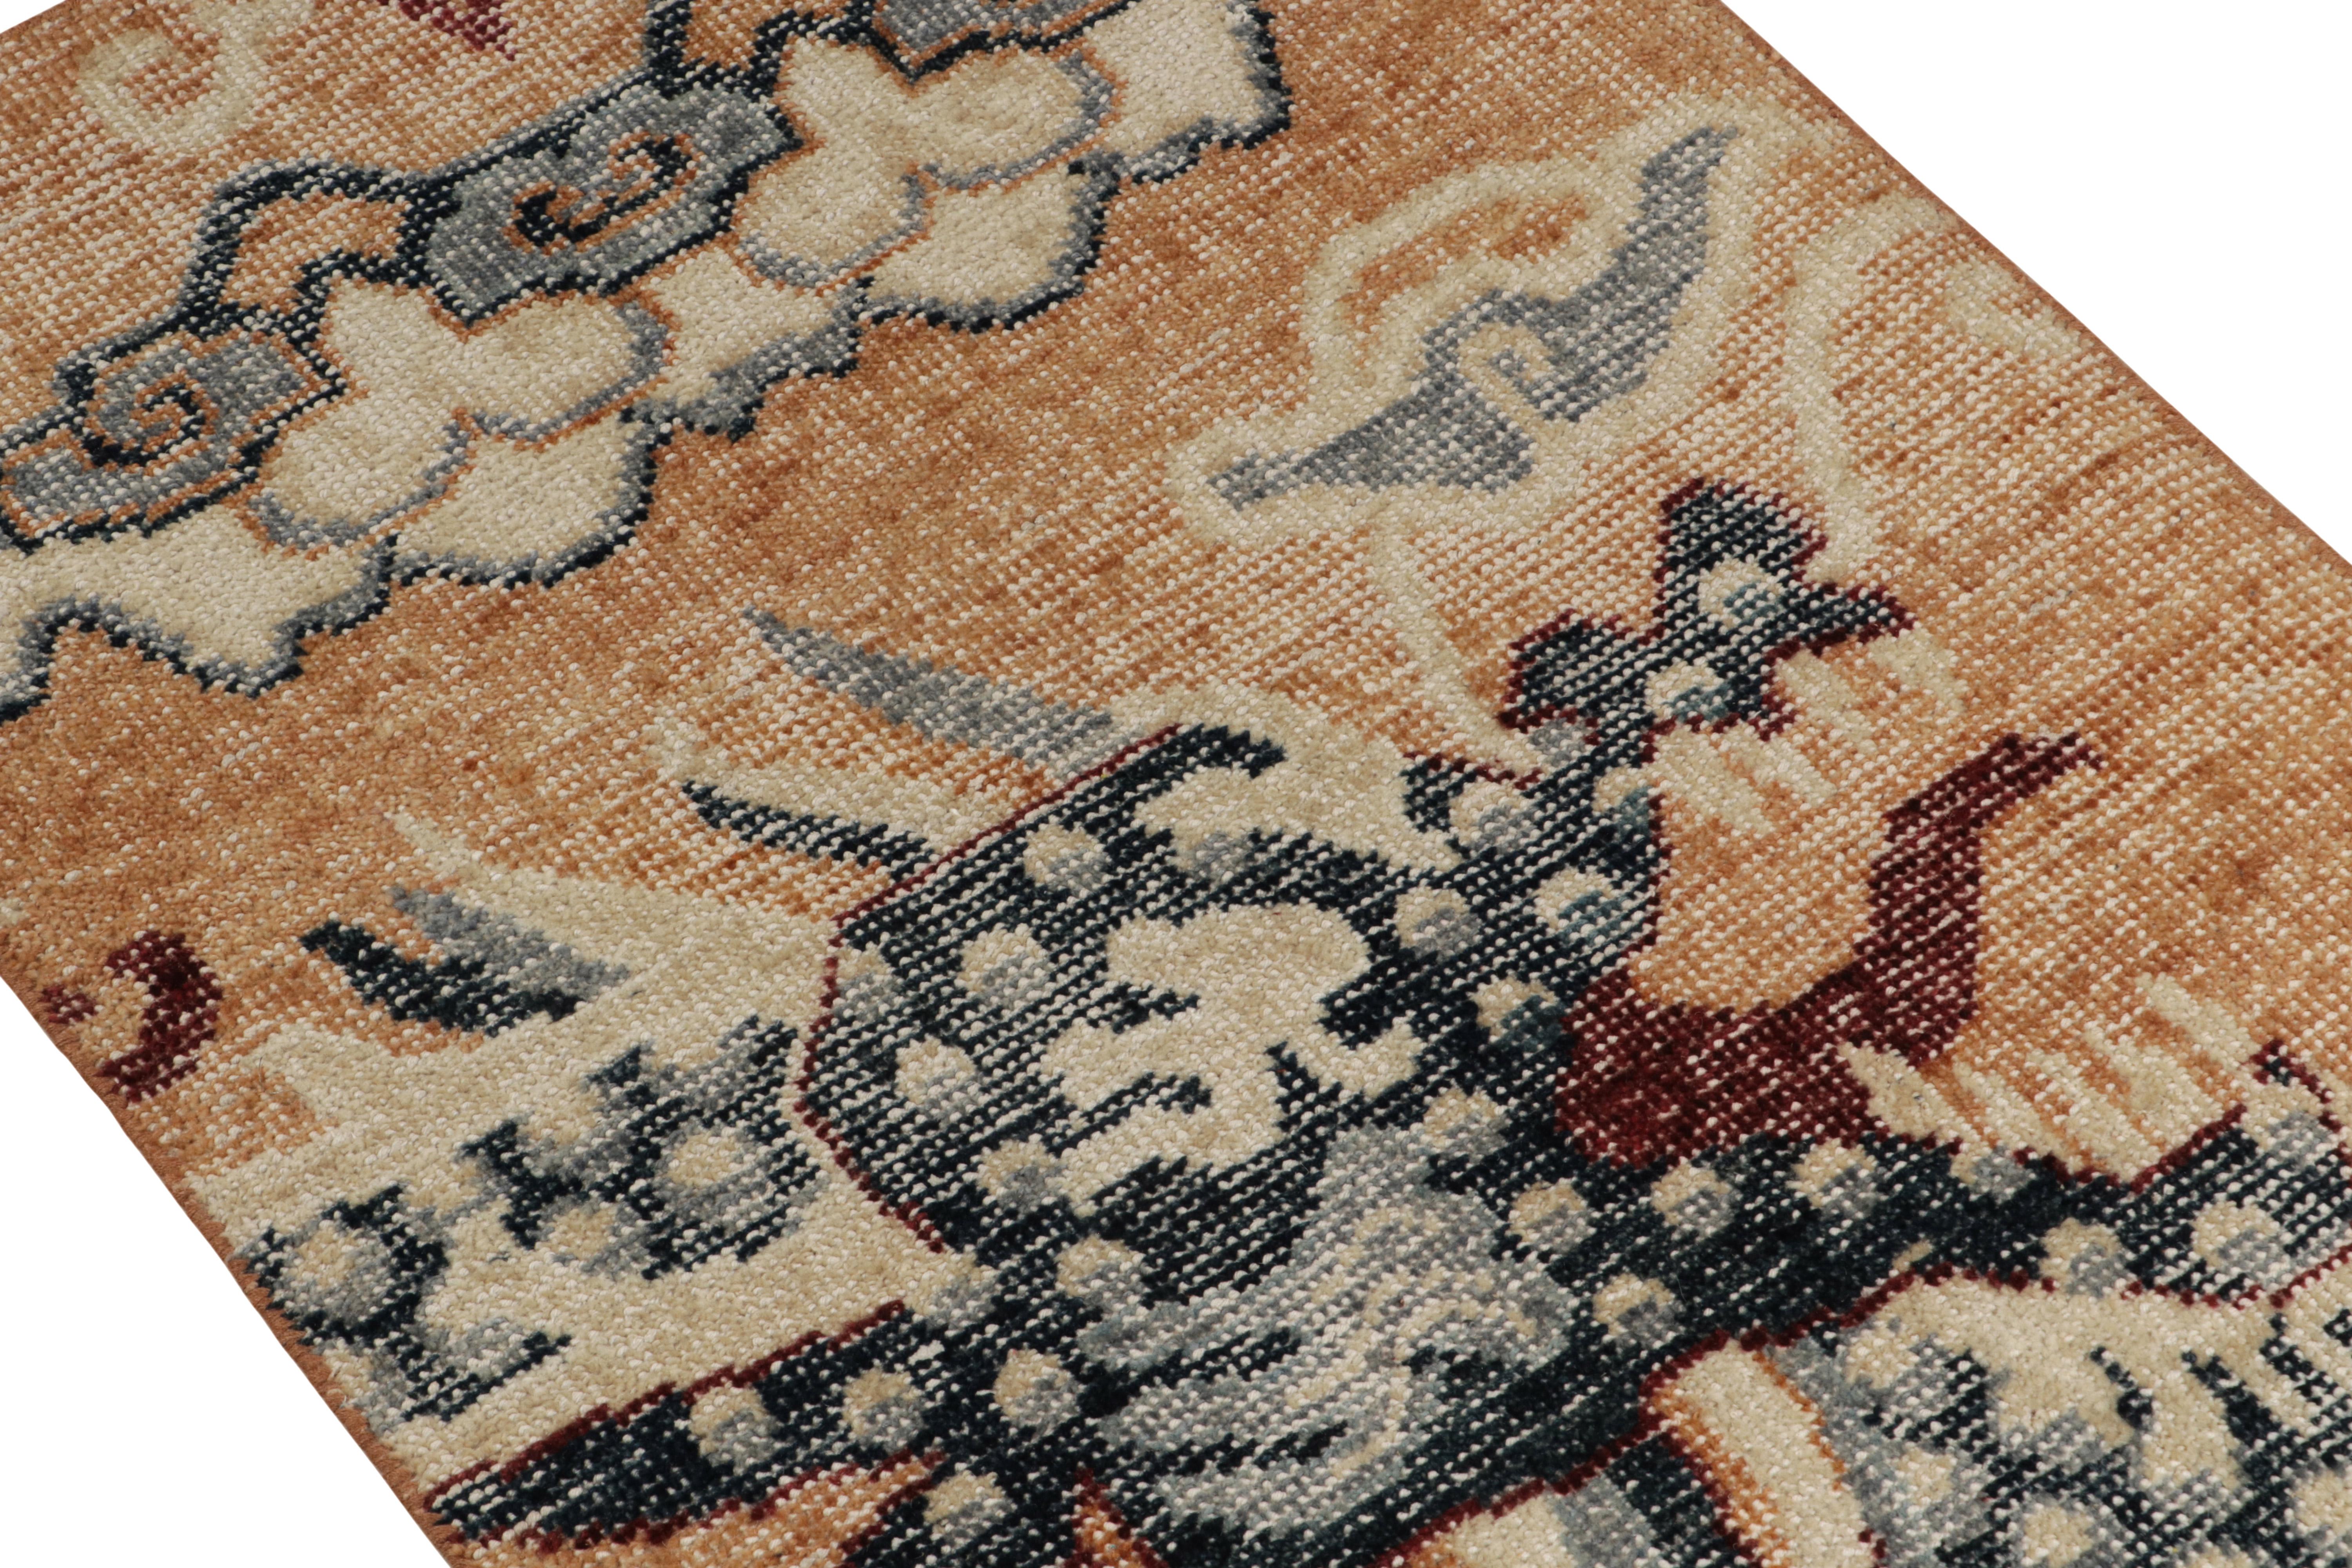 Indian Rug & Kilim’s Distressed Style Gift-Size Rug in Blue Dragon Pictorials